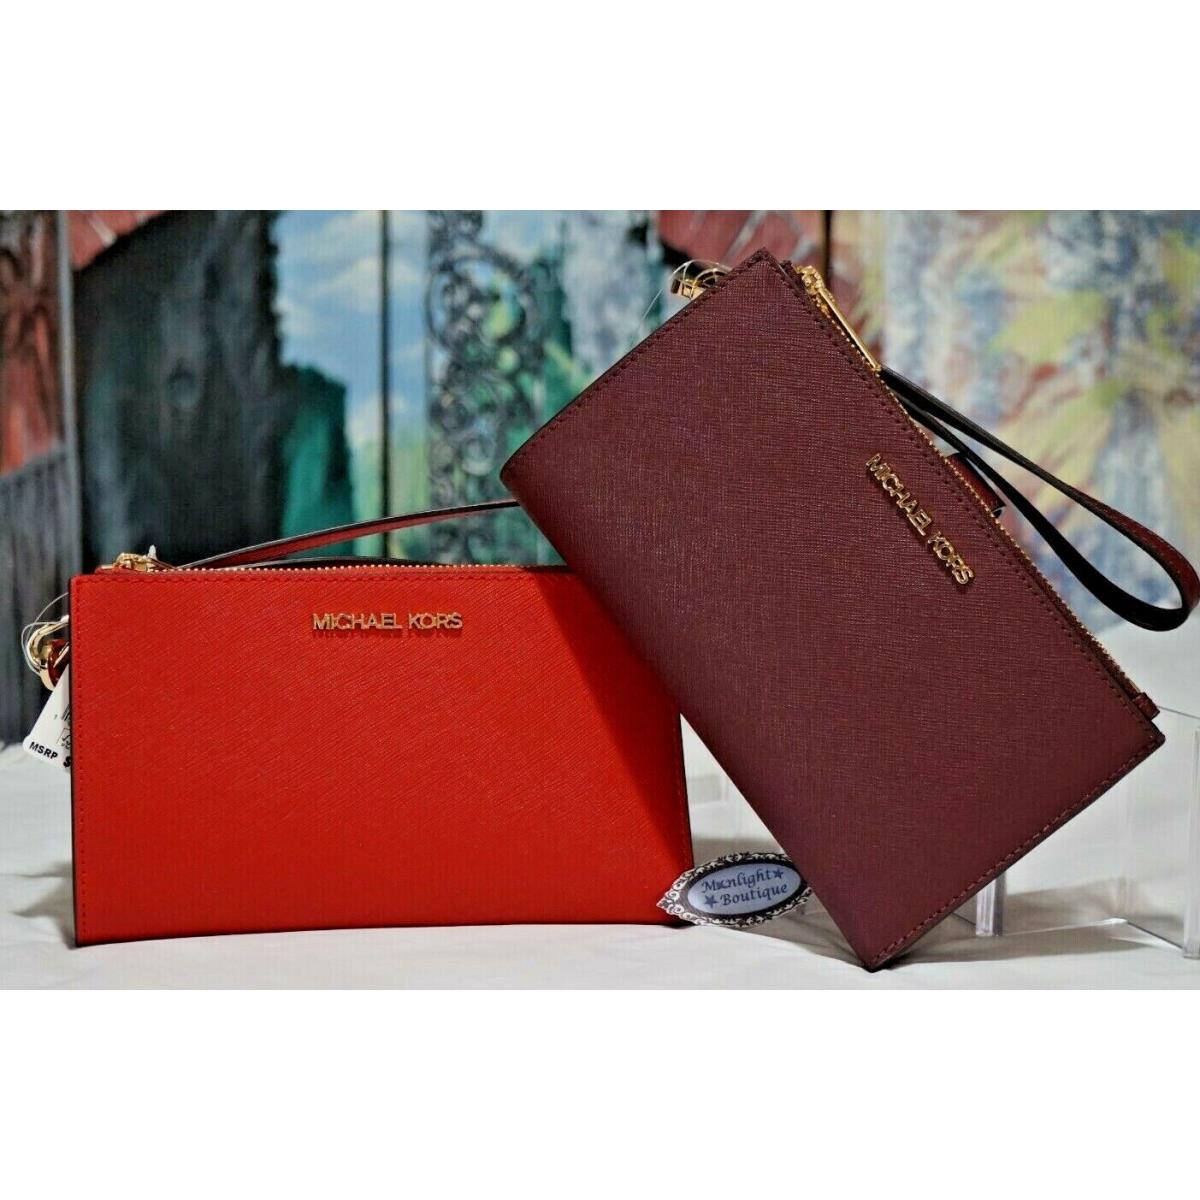 Michael Kors wallet  - Select Your Color: Merlot or Flame 0